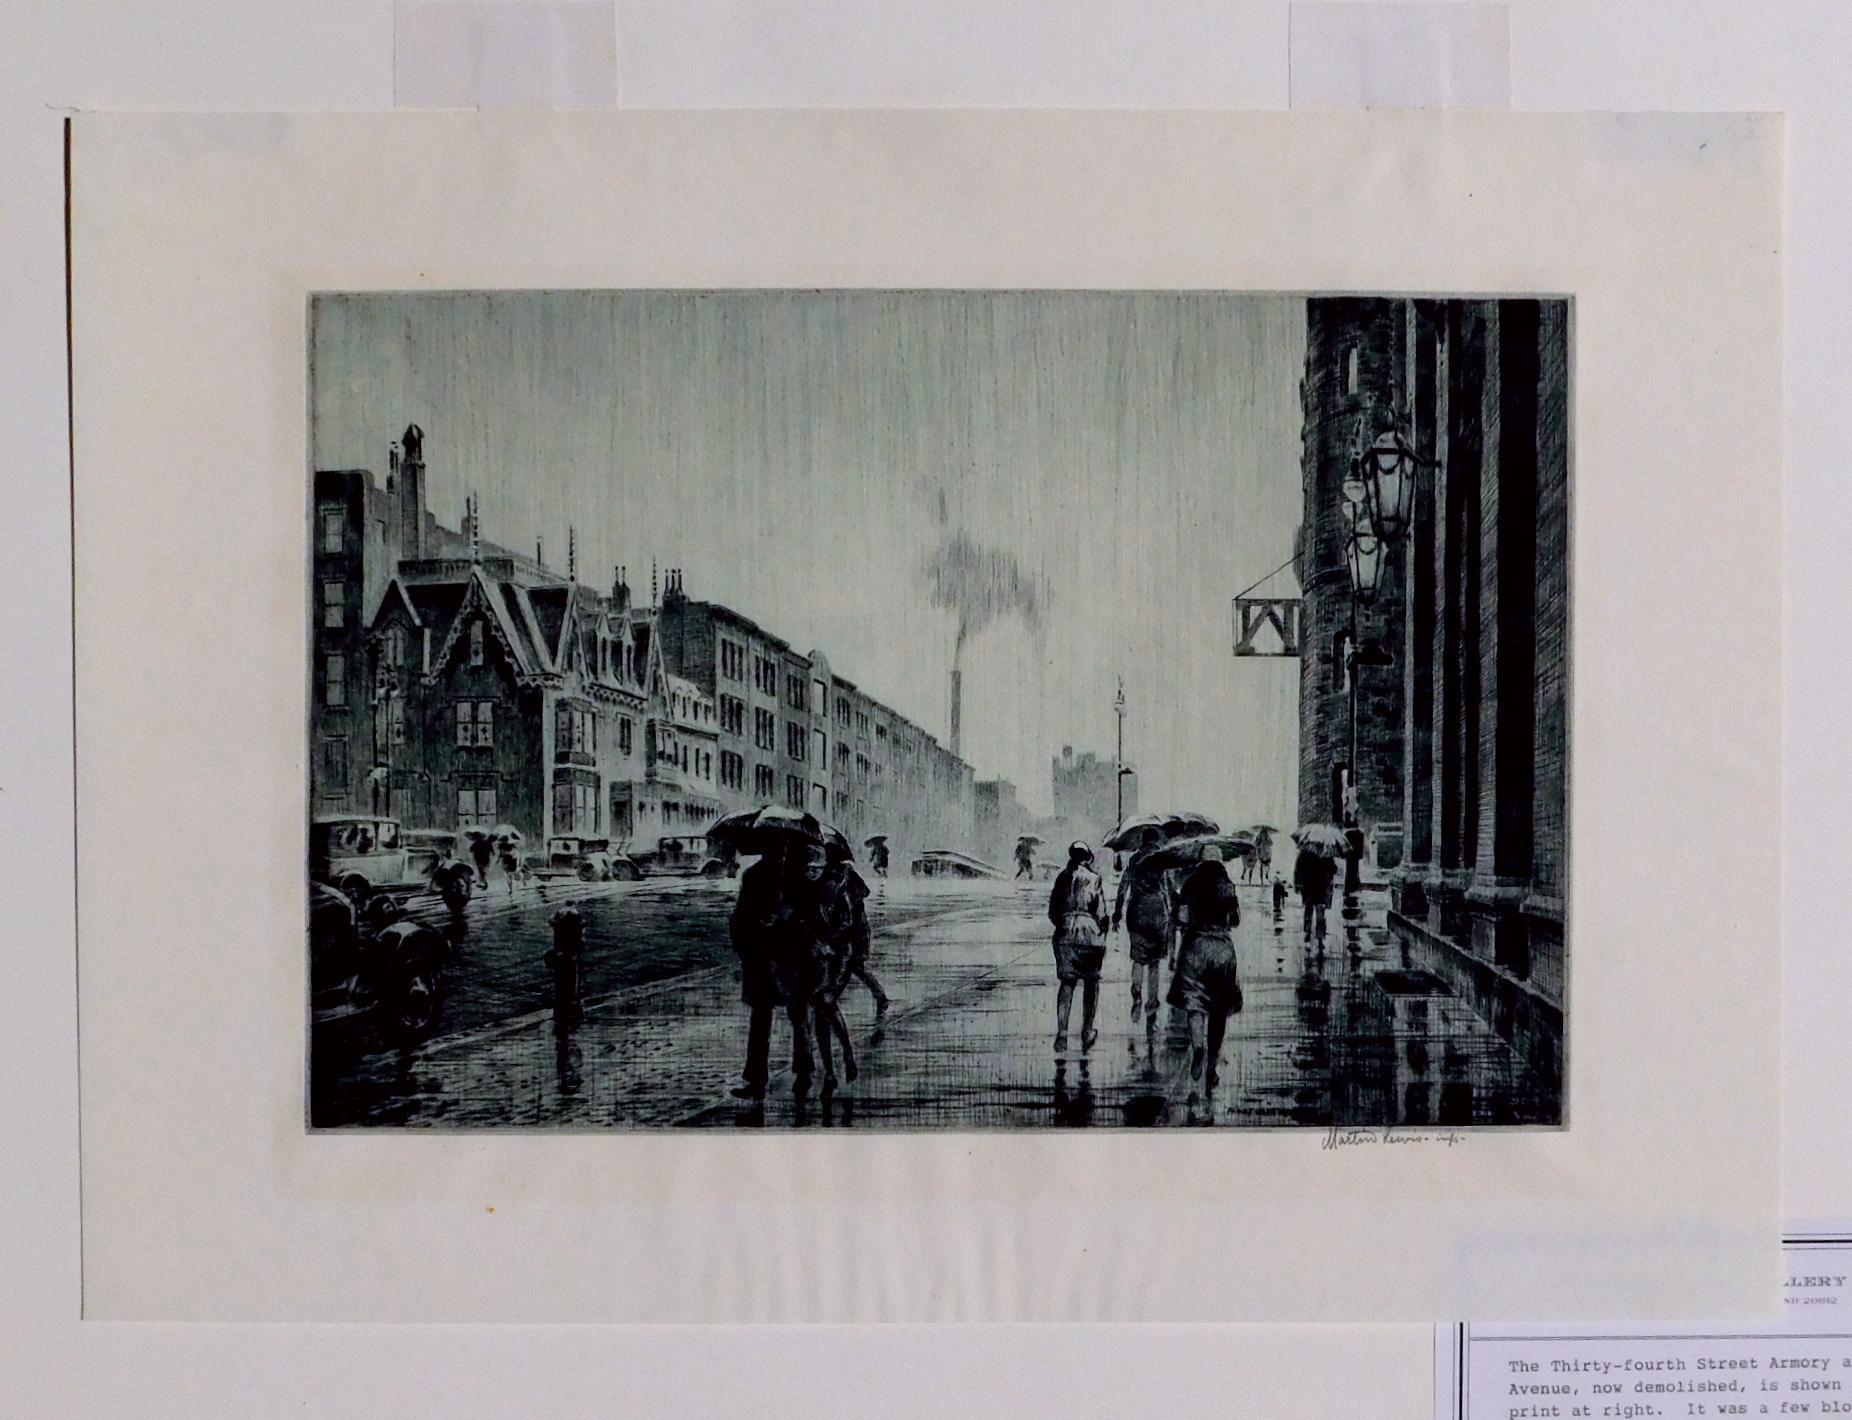 Original drypoint in mint condition printed in greenish black ink on wove paper 
by well-known New York artist and printmaker Martin Lewis (1881-1962).
The print is signed in pencil lower right. McCarron #75. Edition of 100. 
Image measures: 7 7/8